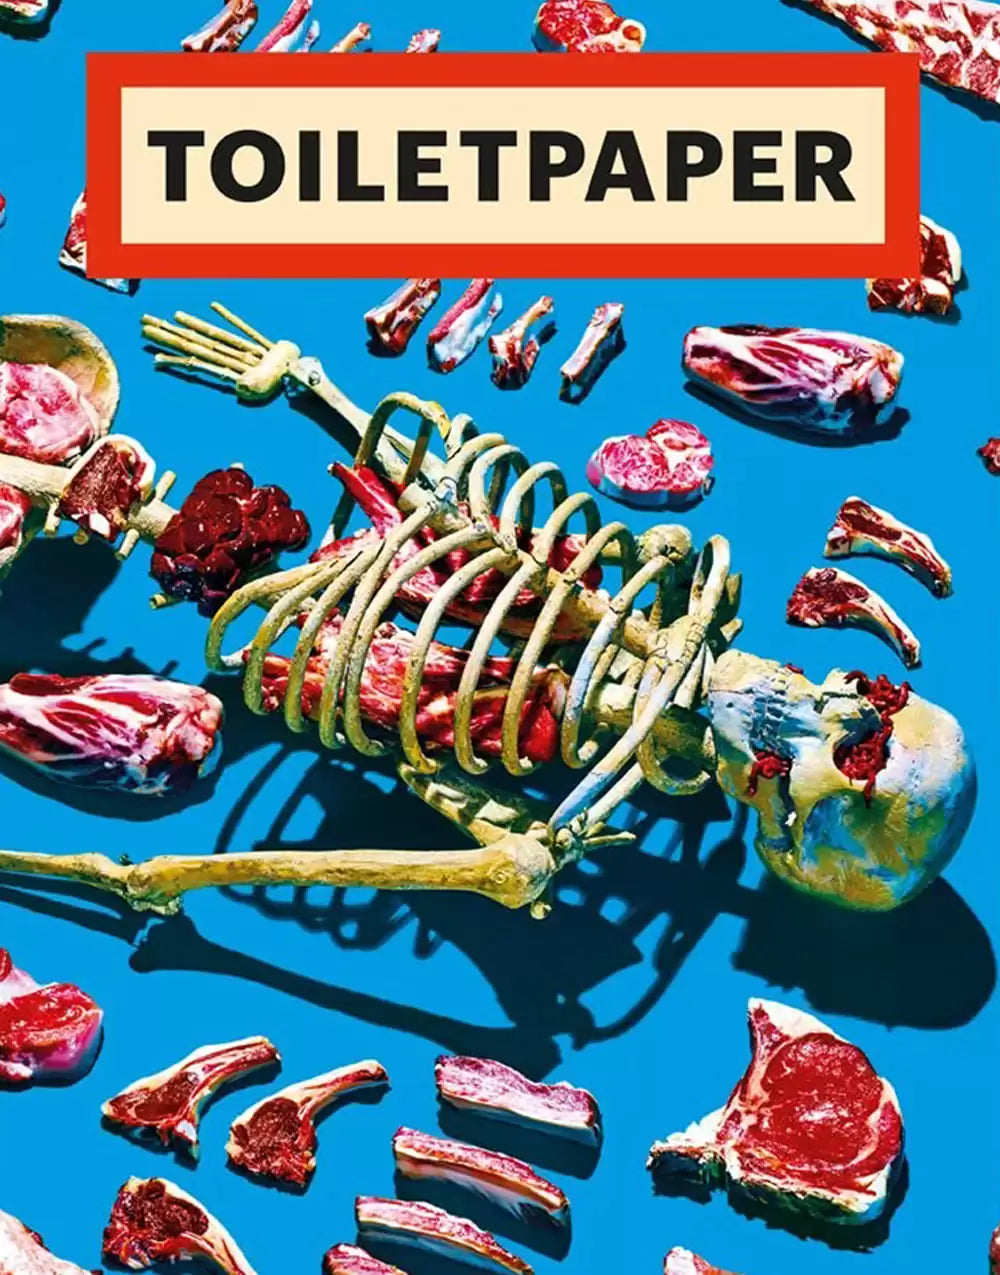 Toiletpaper N. 13 by Maurizio Cattelan and Pierpaolo Ferrari